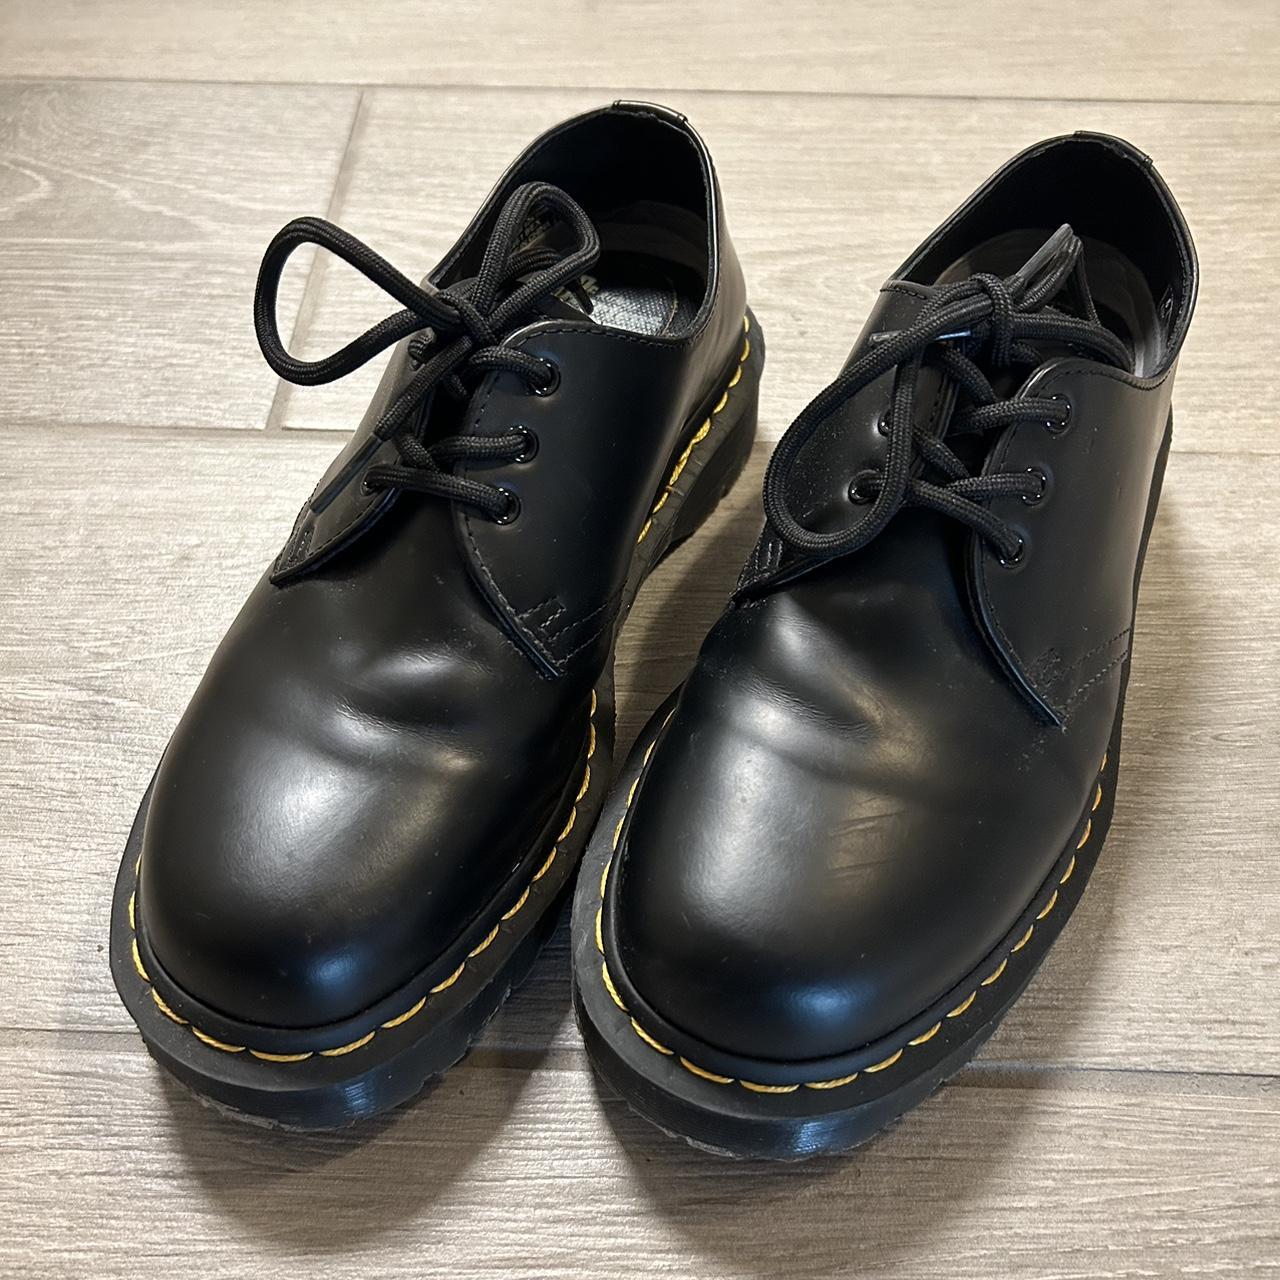 Dr. Martens 1461 BEX SMOOTH LEATHER OXFORDS WOMENS... - Depop